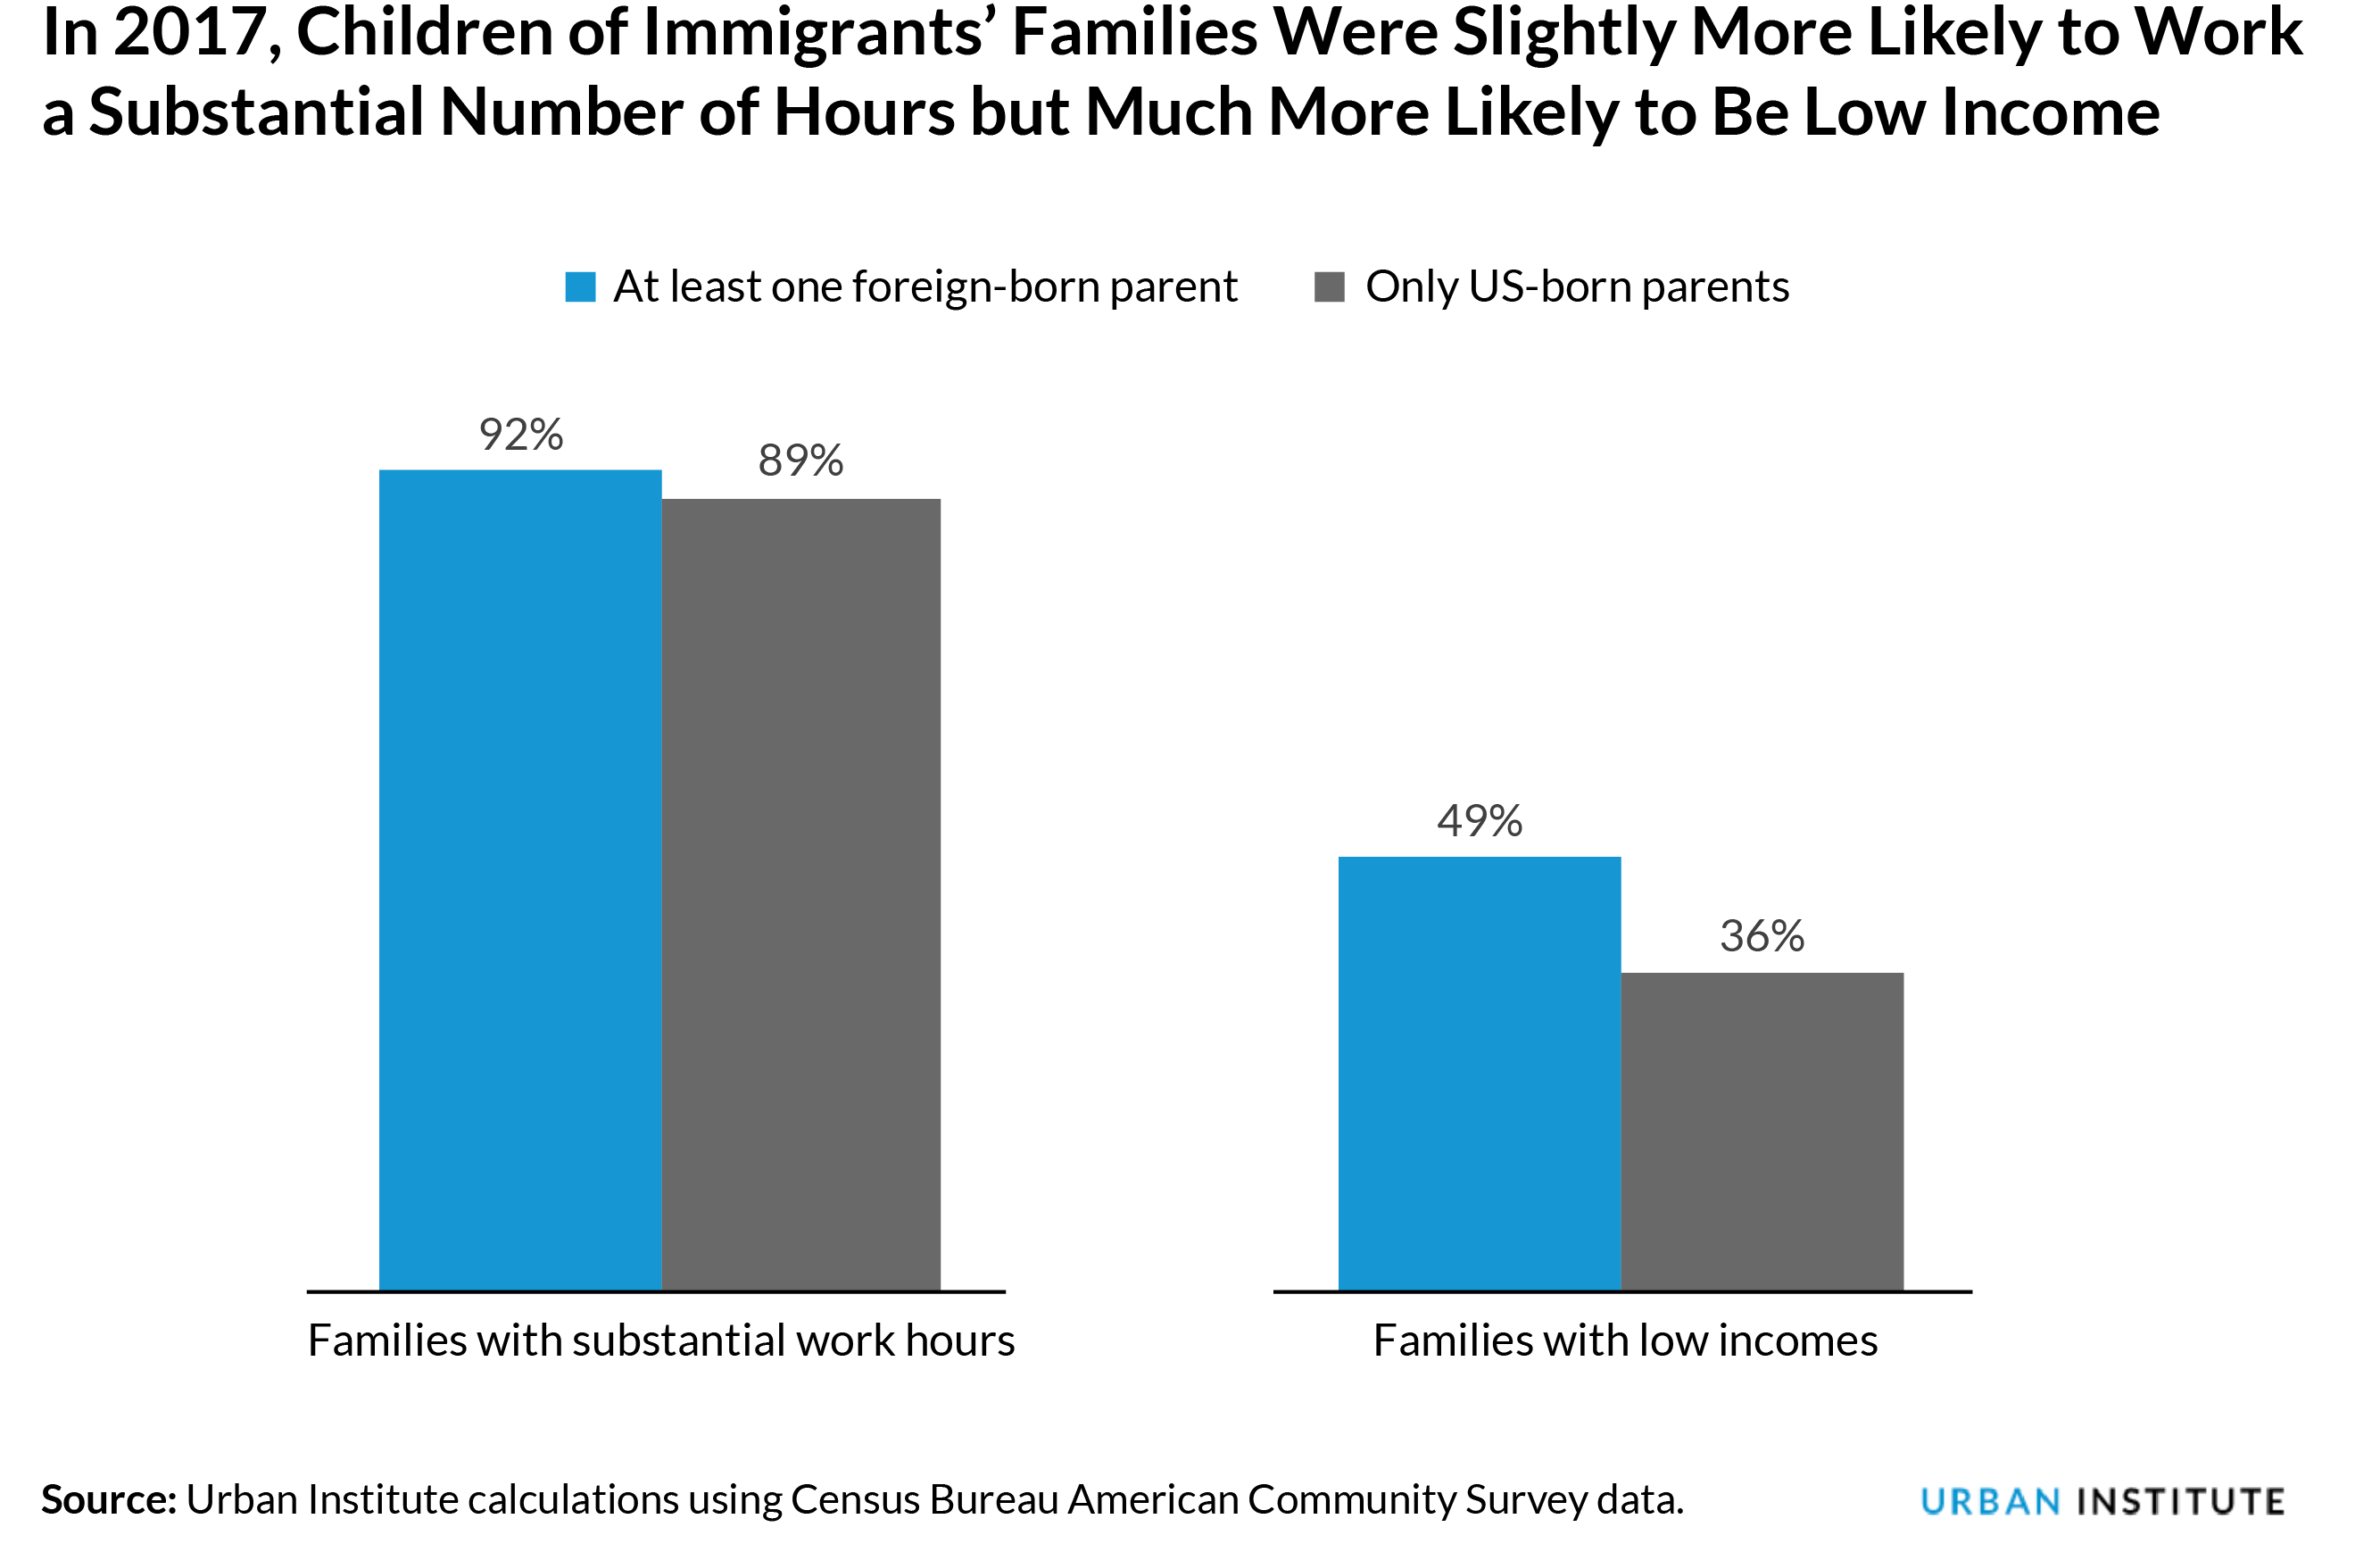 In 2017, Children of Immigrants' Families Were Slightly More Likely to Work a Substantial Number of Hours but Much More Likely to Be Low Income